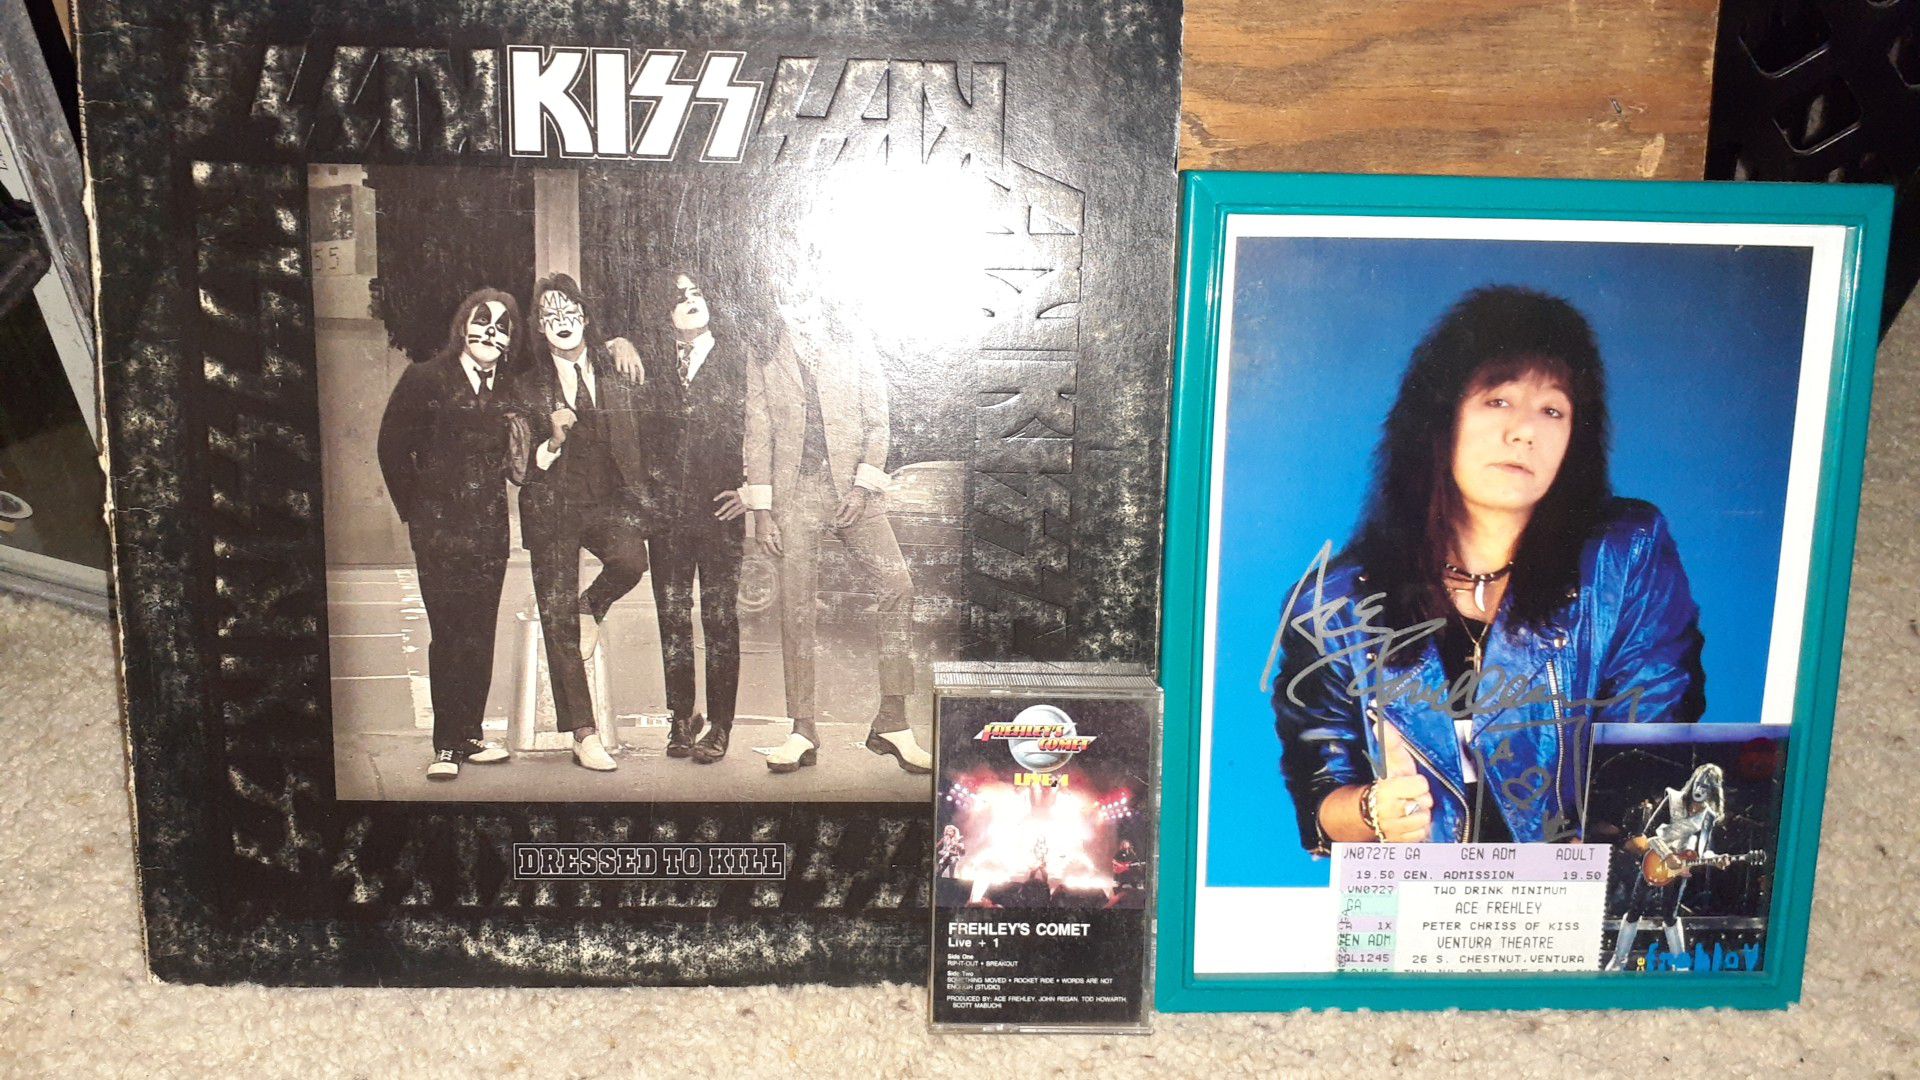 Kiss dressed to kill album and autographed ace frehley 8x10 colored photograph.